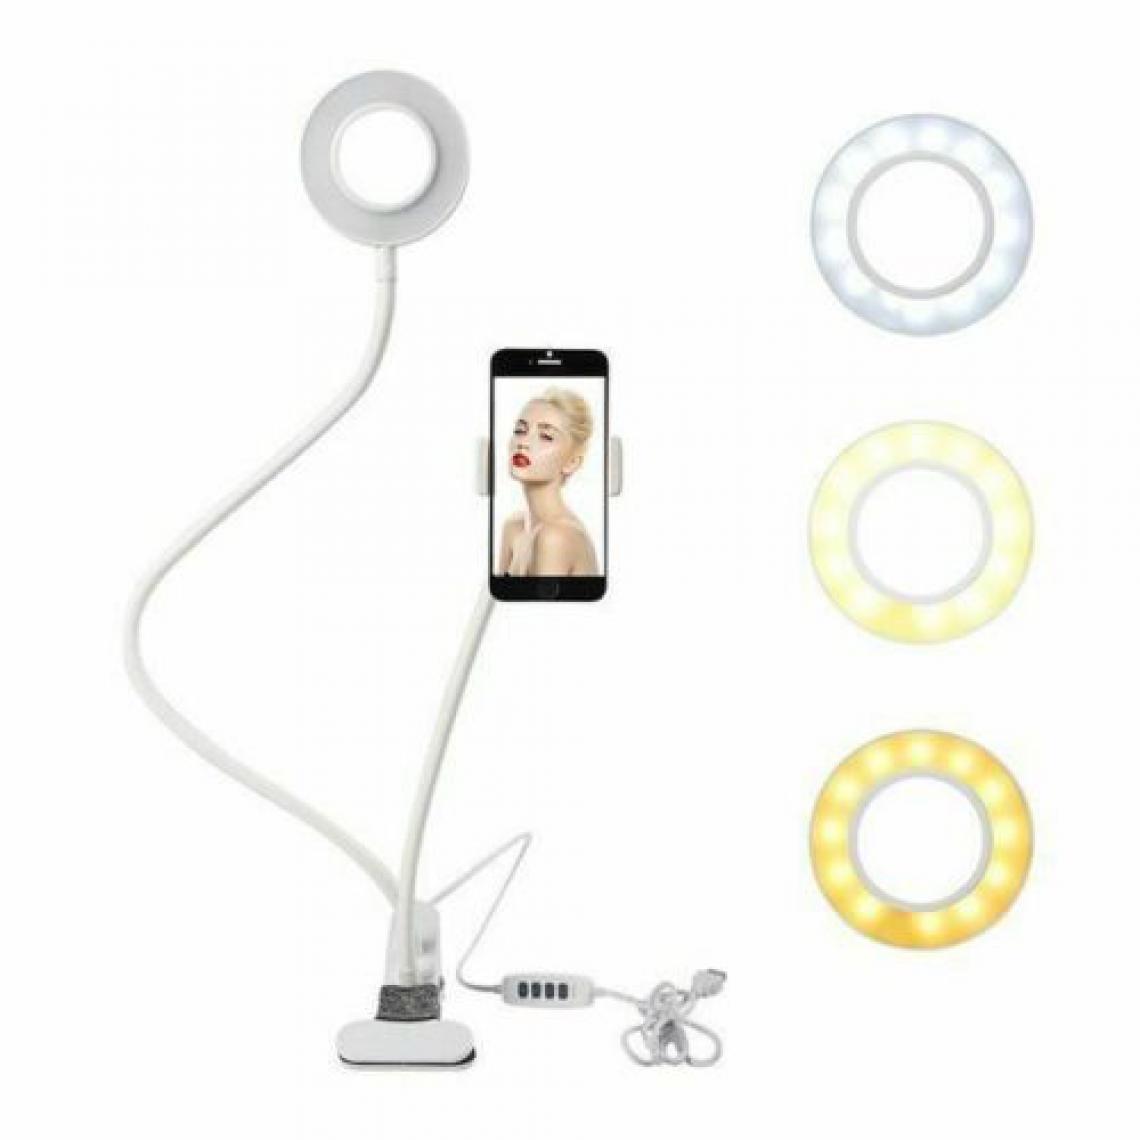 Ozzzo - Stand support bureau selfie led ozzzo blanc pour HUAWEI P20 Pro - Station d'accueil smartphone